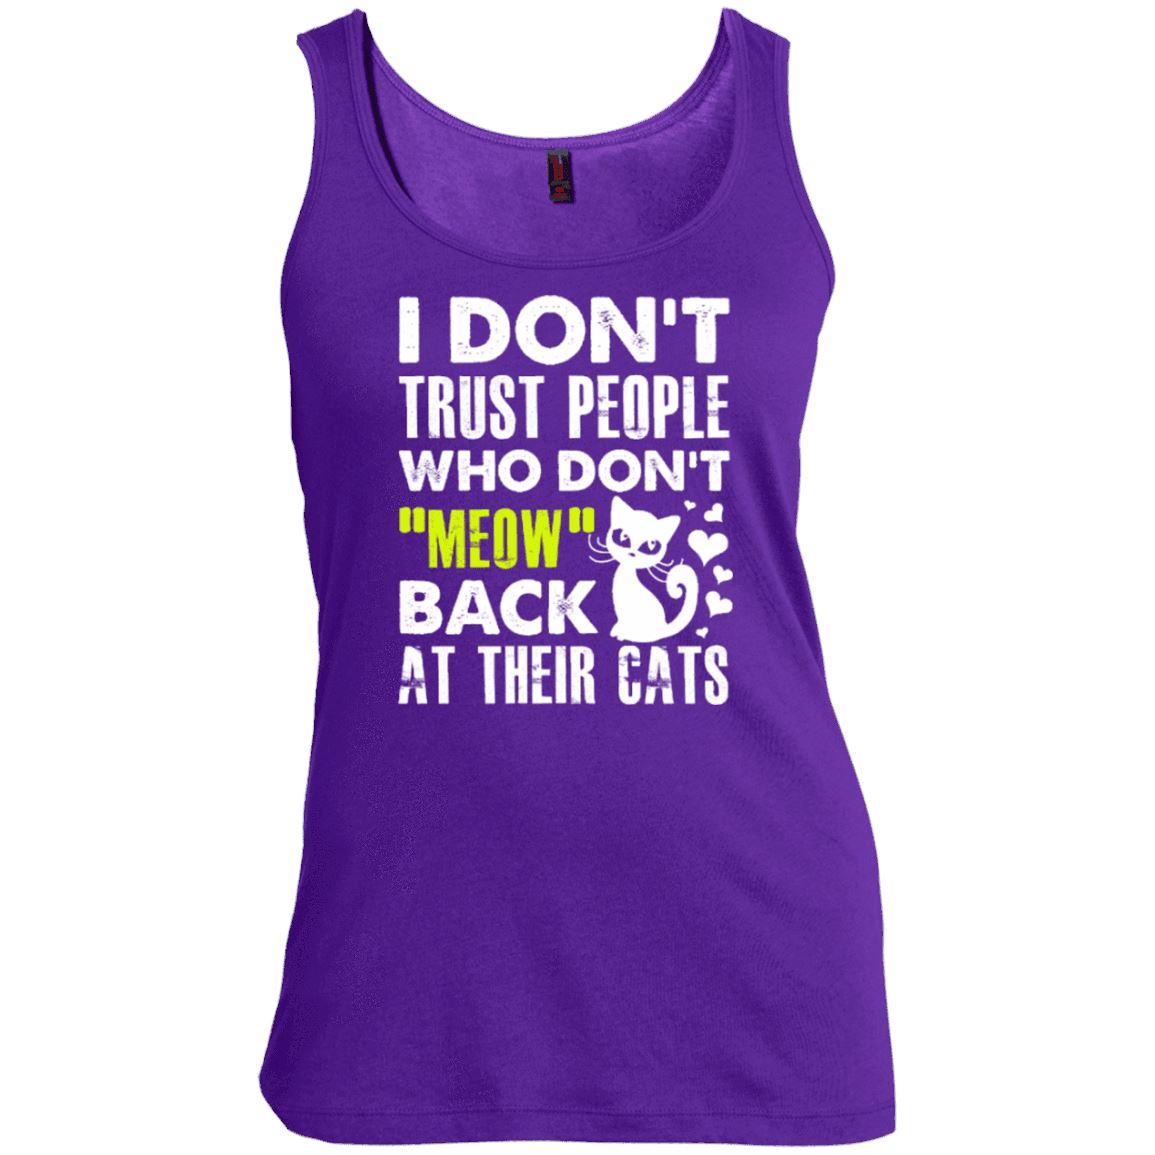 Cat Tee - I Don't Trust People Who Don't Meow Back - CatsForLife